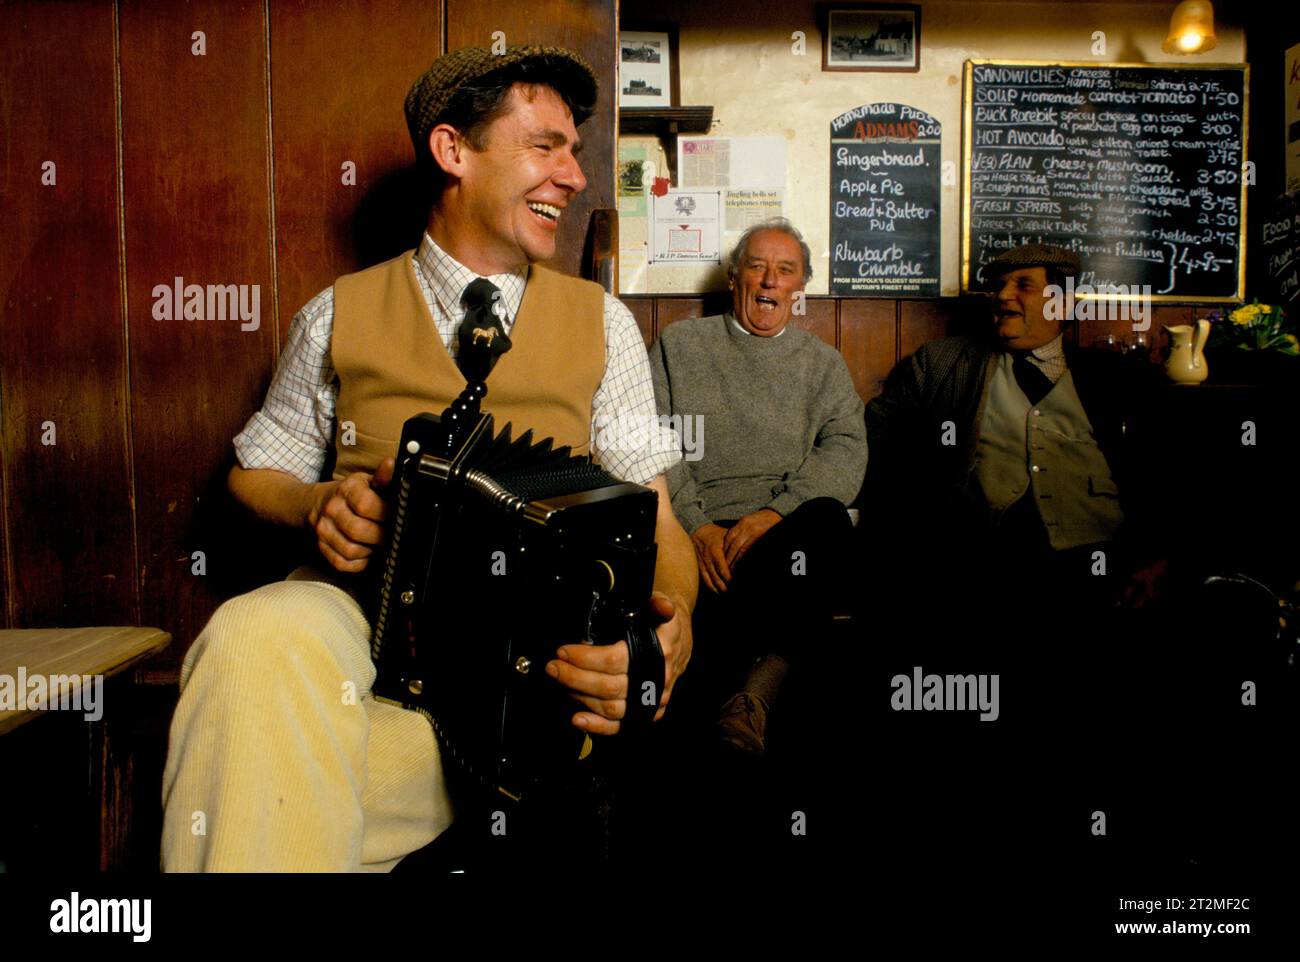 Traditional folk music UK 1980s. Farmers and countrymen gather at the Kings Head, and also know as the Low House pub, in  Laxfield. Traditional story telling, reciting of poetry and folk music songs are performed in an informal manner every Sunday morning. A local farmer playing a melodeon. Laxfield, Suffolk, England  1985. 1980s HOMER SYKES Stock Photo